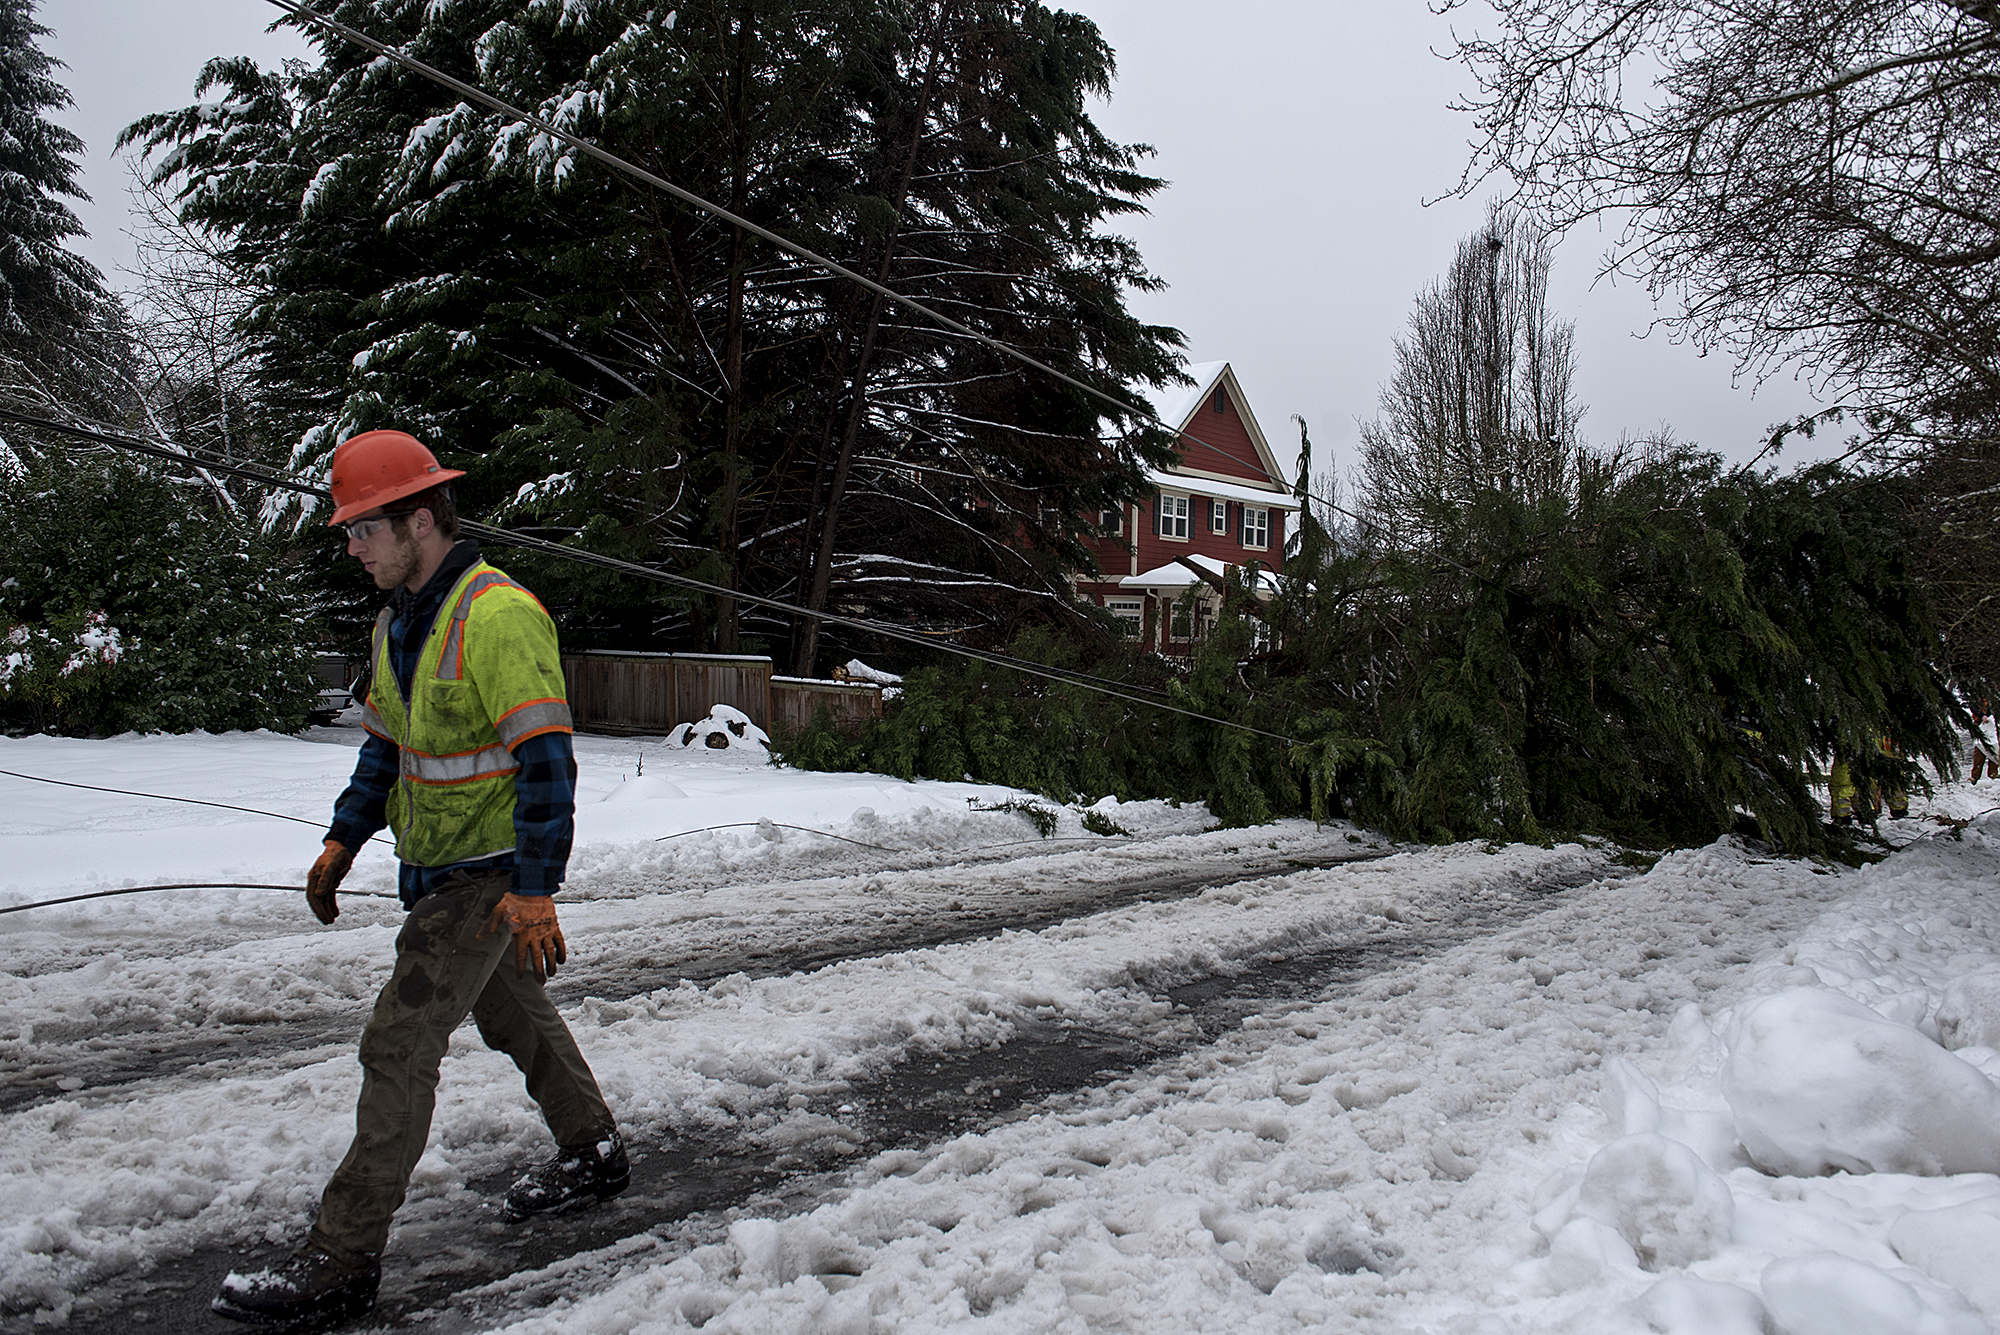 Parker McFadden of Asplundh lens a hand after a tree toppled power lines, knocked out power and closed Northeast 114th Avenue in both directions to traffic following an ice storm Monday morning, Feb. 15, 2021.